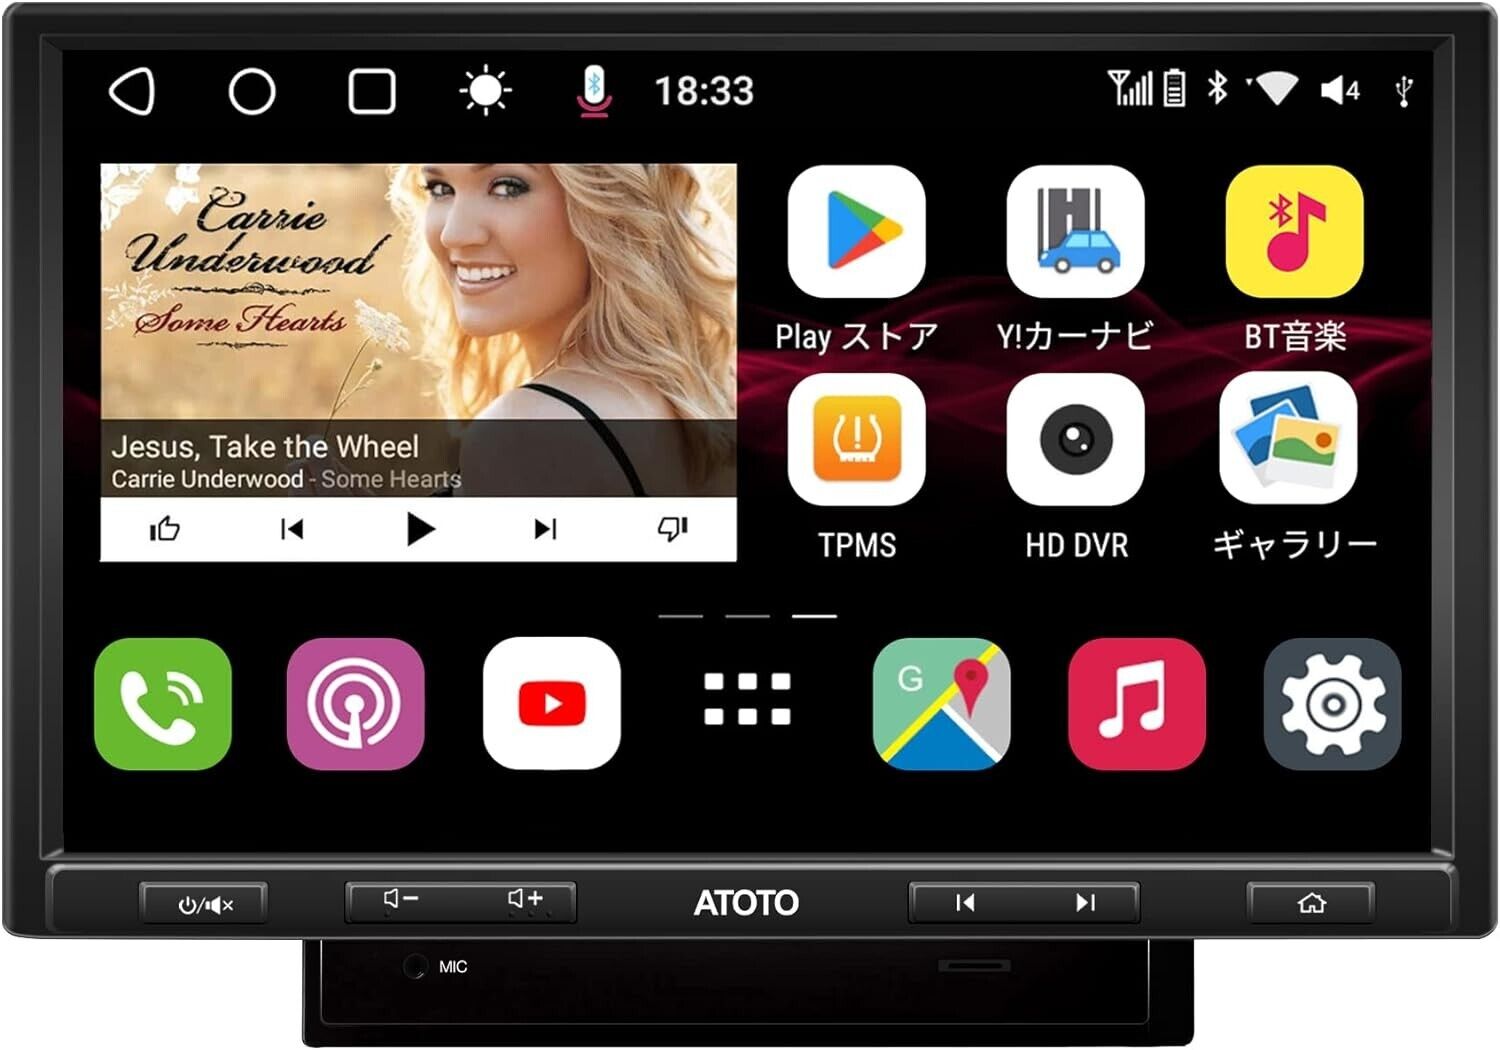 [New] ATOTO S8 Pro Double-DIN Android Car Stereo Receiver, Wireless CarPlay